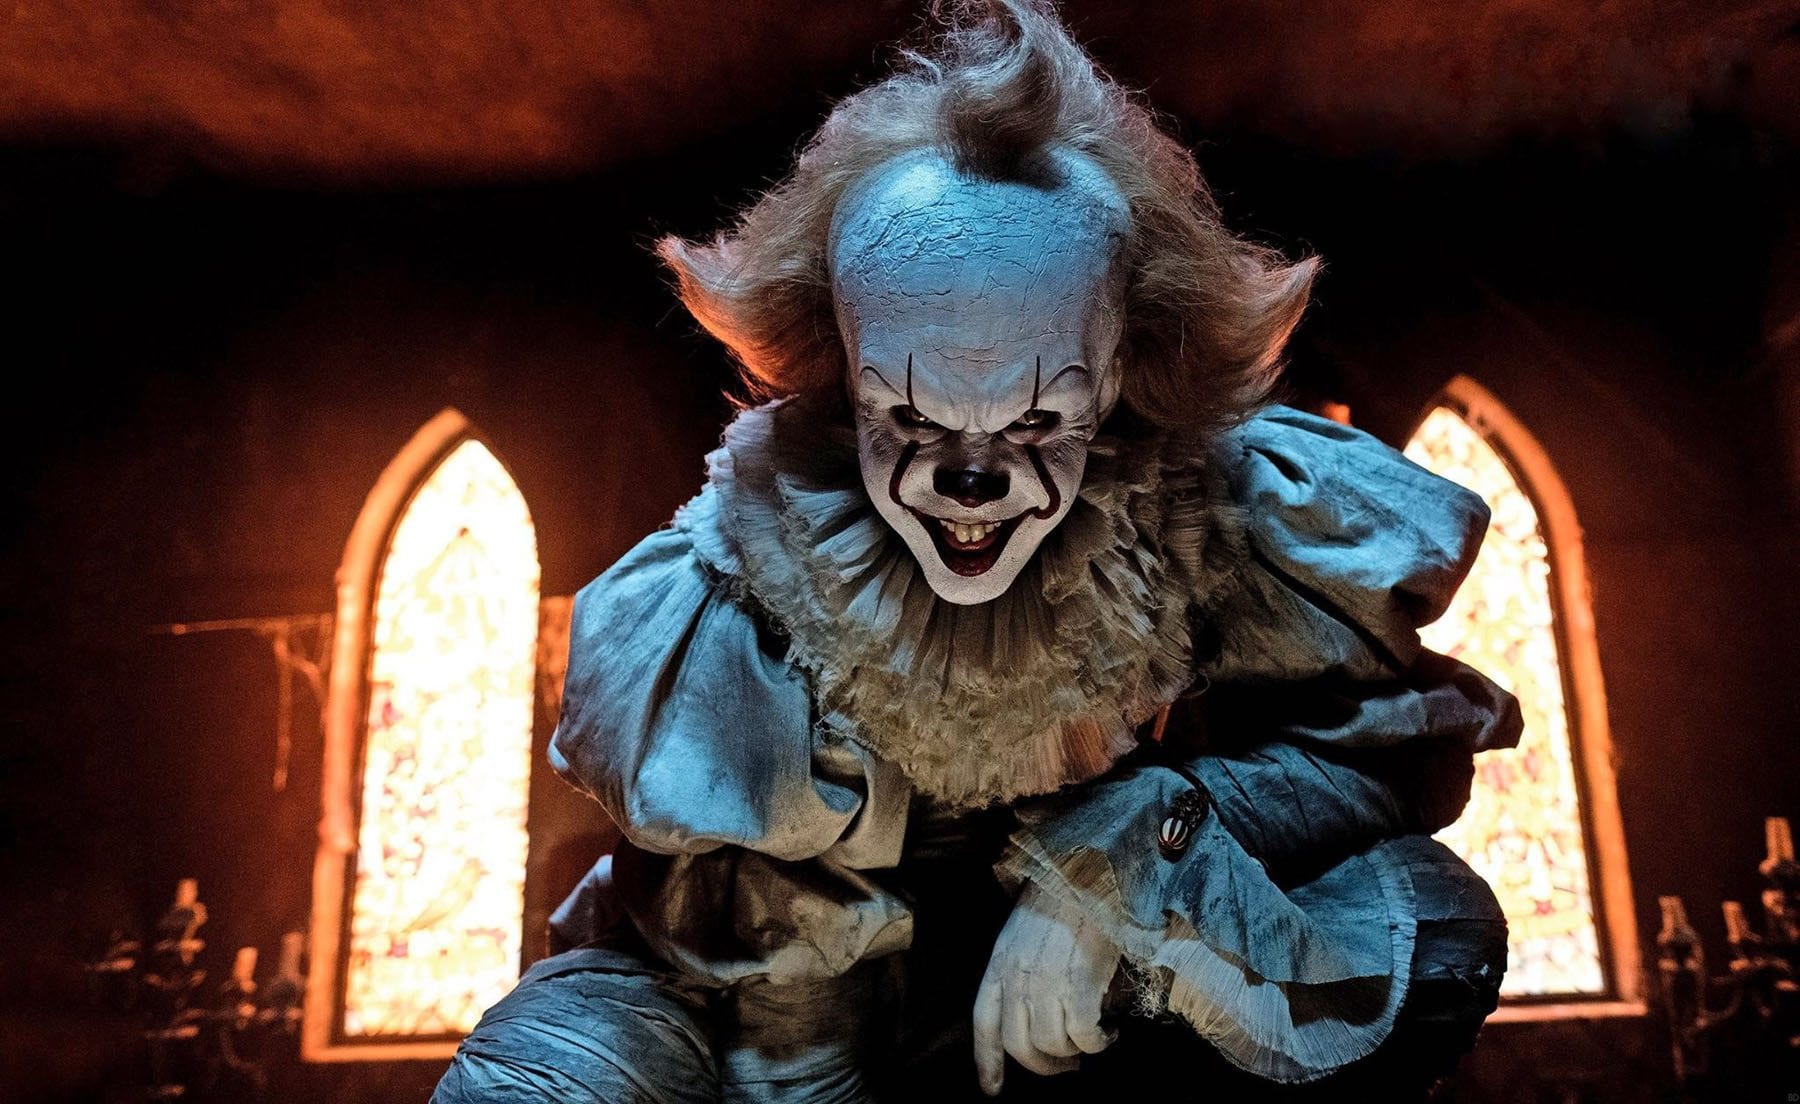 ‘It’, directed by Andrés Muschietti, is based on the hugely popular Stephen King novel of the same name, which has been terrifying readers for decades.